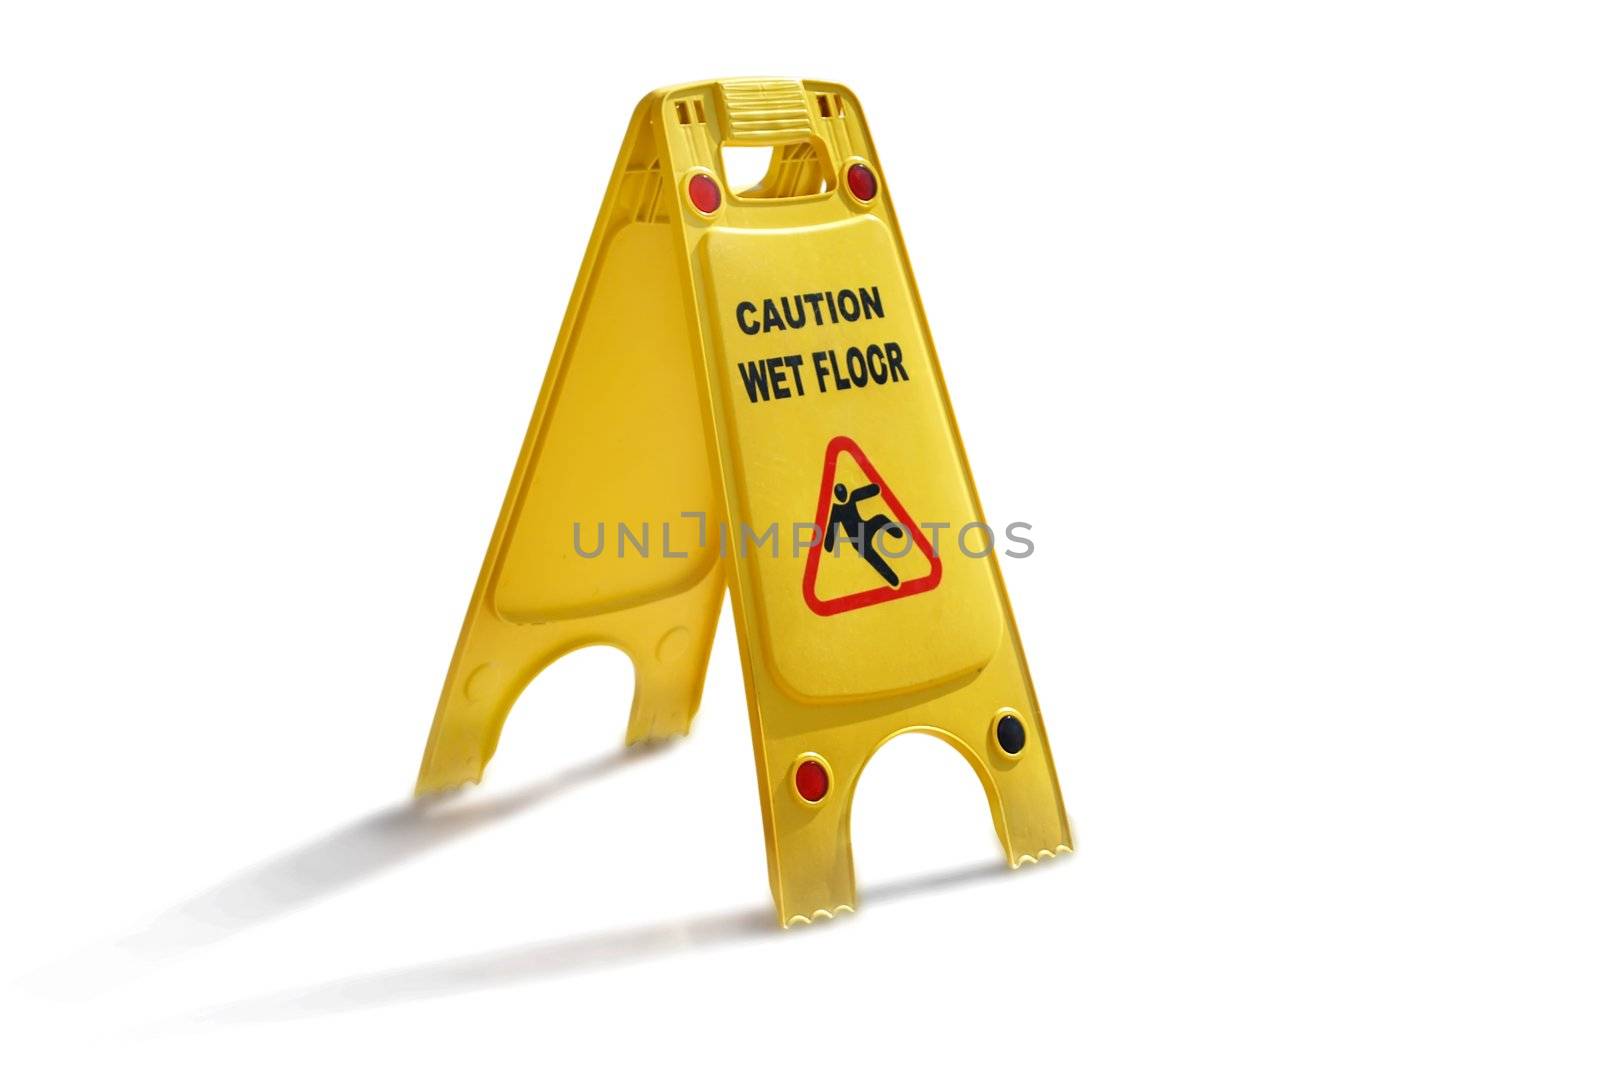 Wet Floor Caution Yellow Plastic Sign Isolated on White Background. Be Careful :)